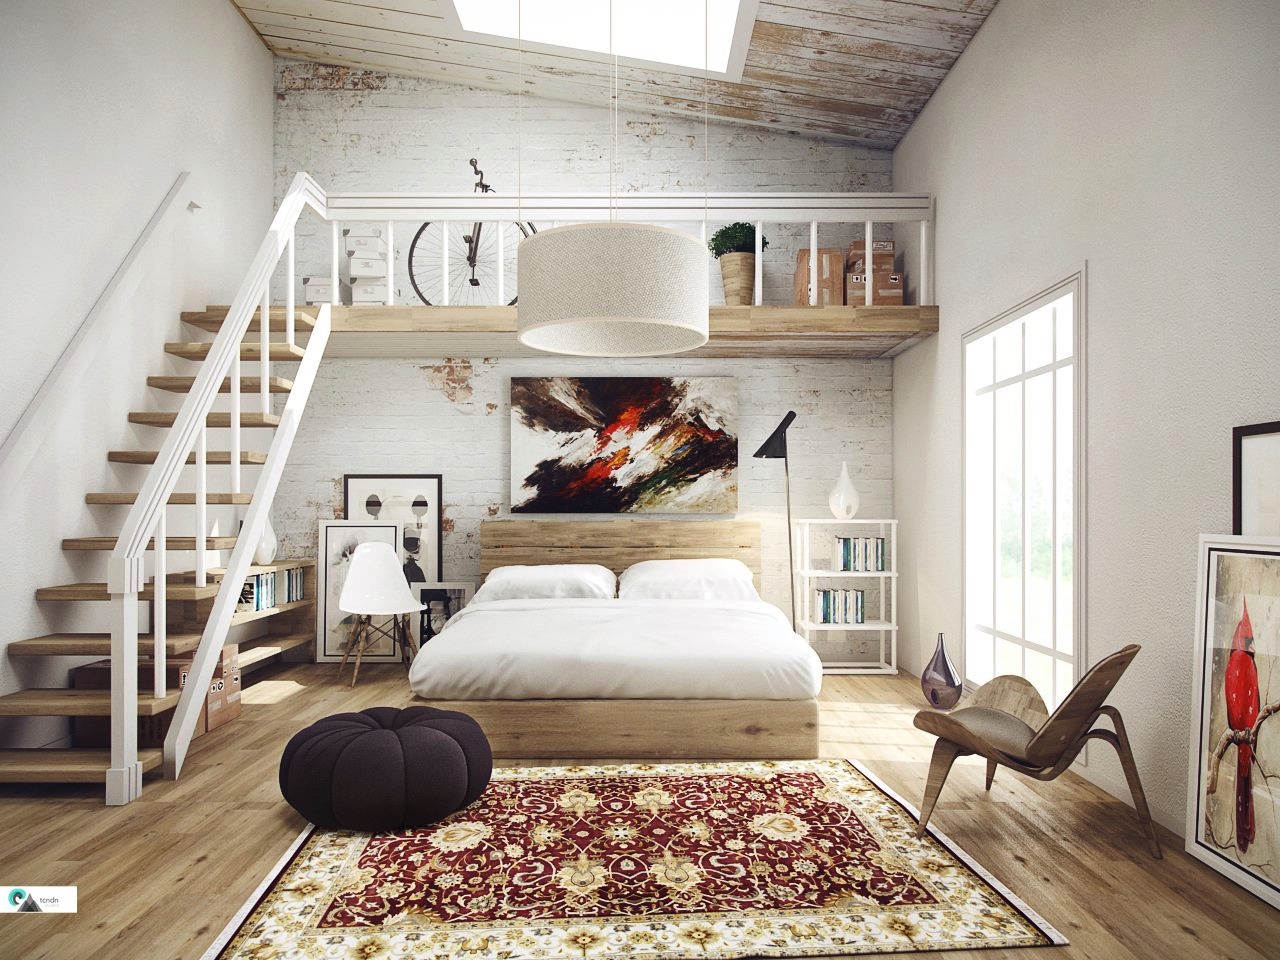 Creative loft bedroom design "width =" 1280 "height =" 960 "srcset =" https://mileray.com/wp-content/uploads/2020/05/1588505279_3_10-Gorgeous-Bedroom-Designs-That-Perfect-For-Laying-All-Day.jpg 1280w, https: // myfashionos .com / wp-content / uploads / 2016/03 / creative-loft-design-300x225.jpg 300w, https://mileray.com/wp-content/uploads/2016/03/creative-loft-design-768x576. jpg 768w, https://mileray.com/wp-content/uploads/2016/03/creative-loft-design-1024x768.jpg 1024w, https://mileray.com/wp-content/uploads/2016/03/ creative-loft-design-80x60.jpg 80w, https://mileray.com/wp-content/uploads/2016/03/creative-loft-design-265x198.jpg 265w, https://mileray.com/wp- content / uploads / 2016/03 / creative-loft-design-696x522.jpg 696w, https://mileray.com/wp-content/uploads/2016/03/creative-loft-design-1068x801.jpg 1068w, https: //mileray.com/wp-content/uploads/2016/03/creative-loft-design-560x420.jpg 560w "sizes =" (maximum width: 1280px) 100vw, 1280px